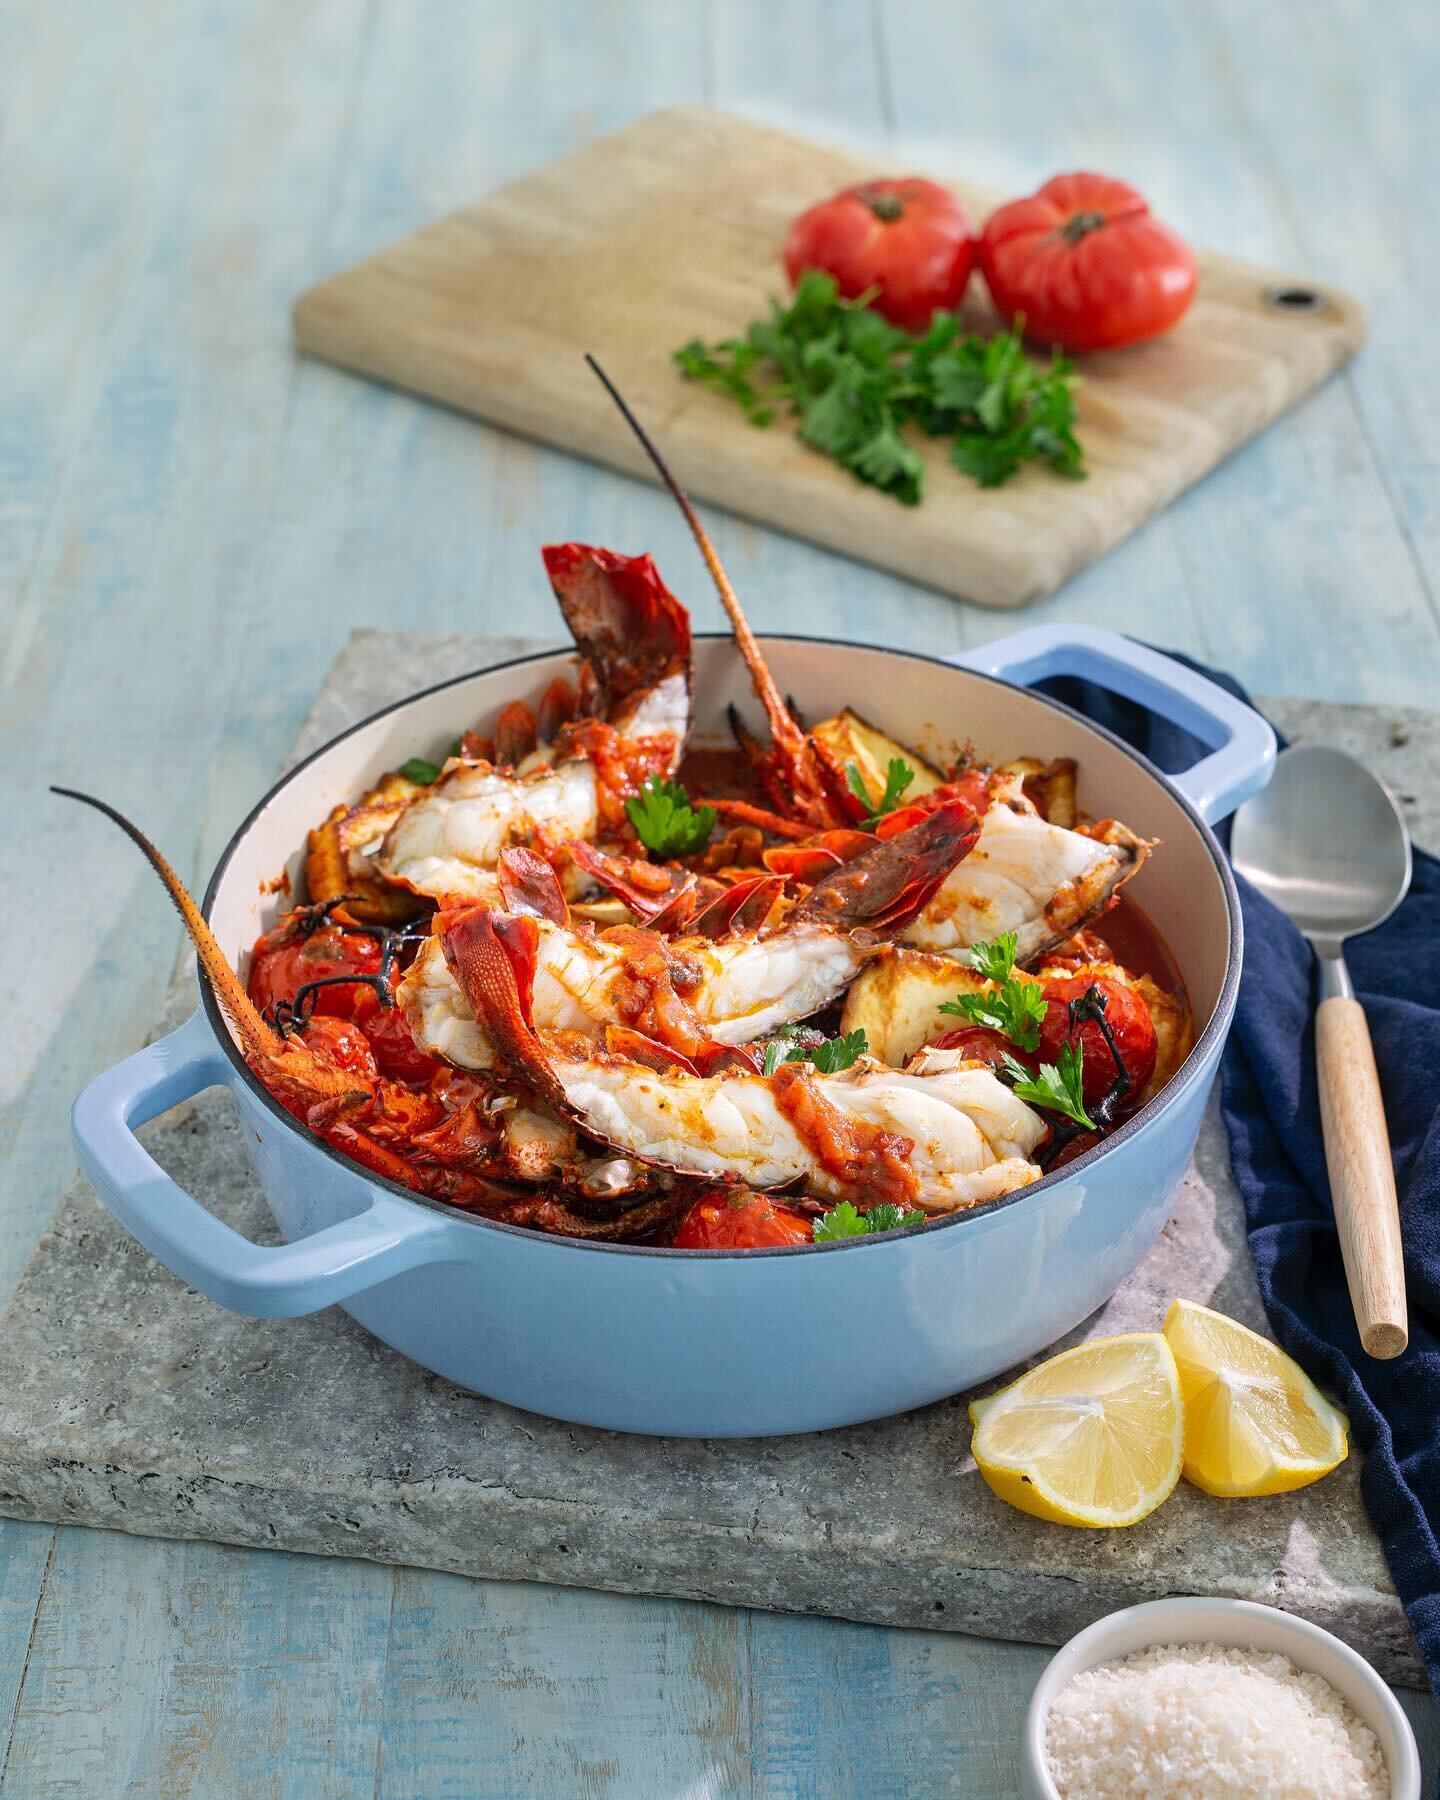 When it&rsquo;s this good you&rsquo;ve got to catch all the angles. Western Rock Lobster Saganaki! Developed for @westernrocklobster and styled by me.. Shot with the lovely Mr @craigkinderfood 😊
Head to the @westernrocklobster feed for the recipe x 